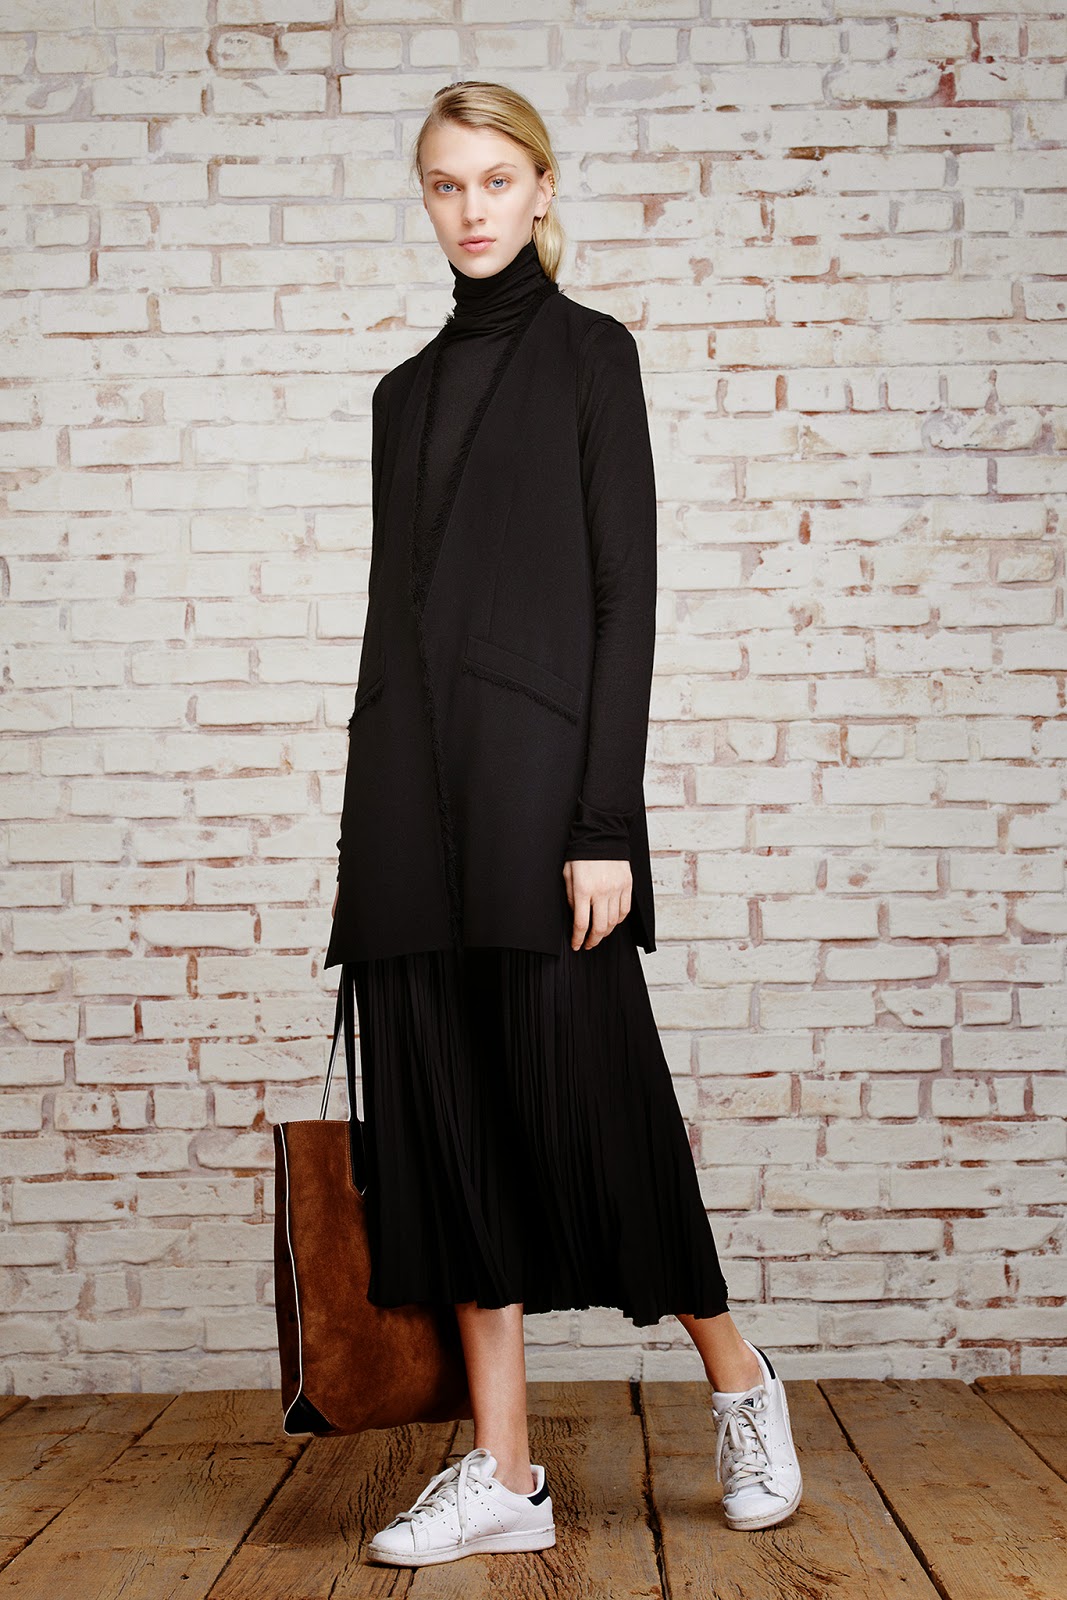 Serendipitylands: ELIZABETH AND JAMES COLLECTION PRE-FALL 2015